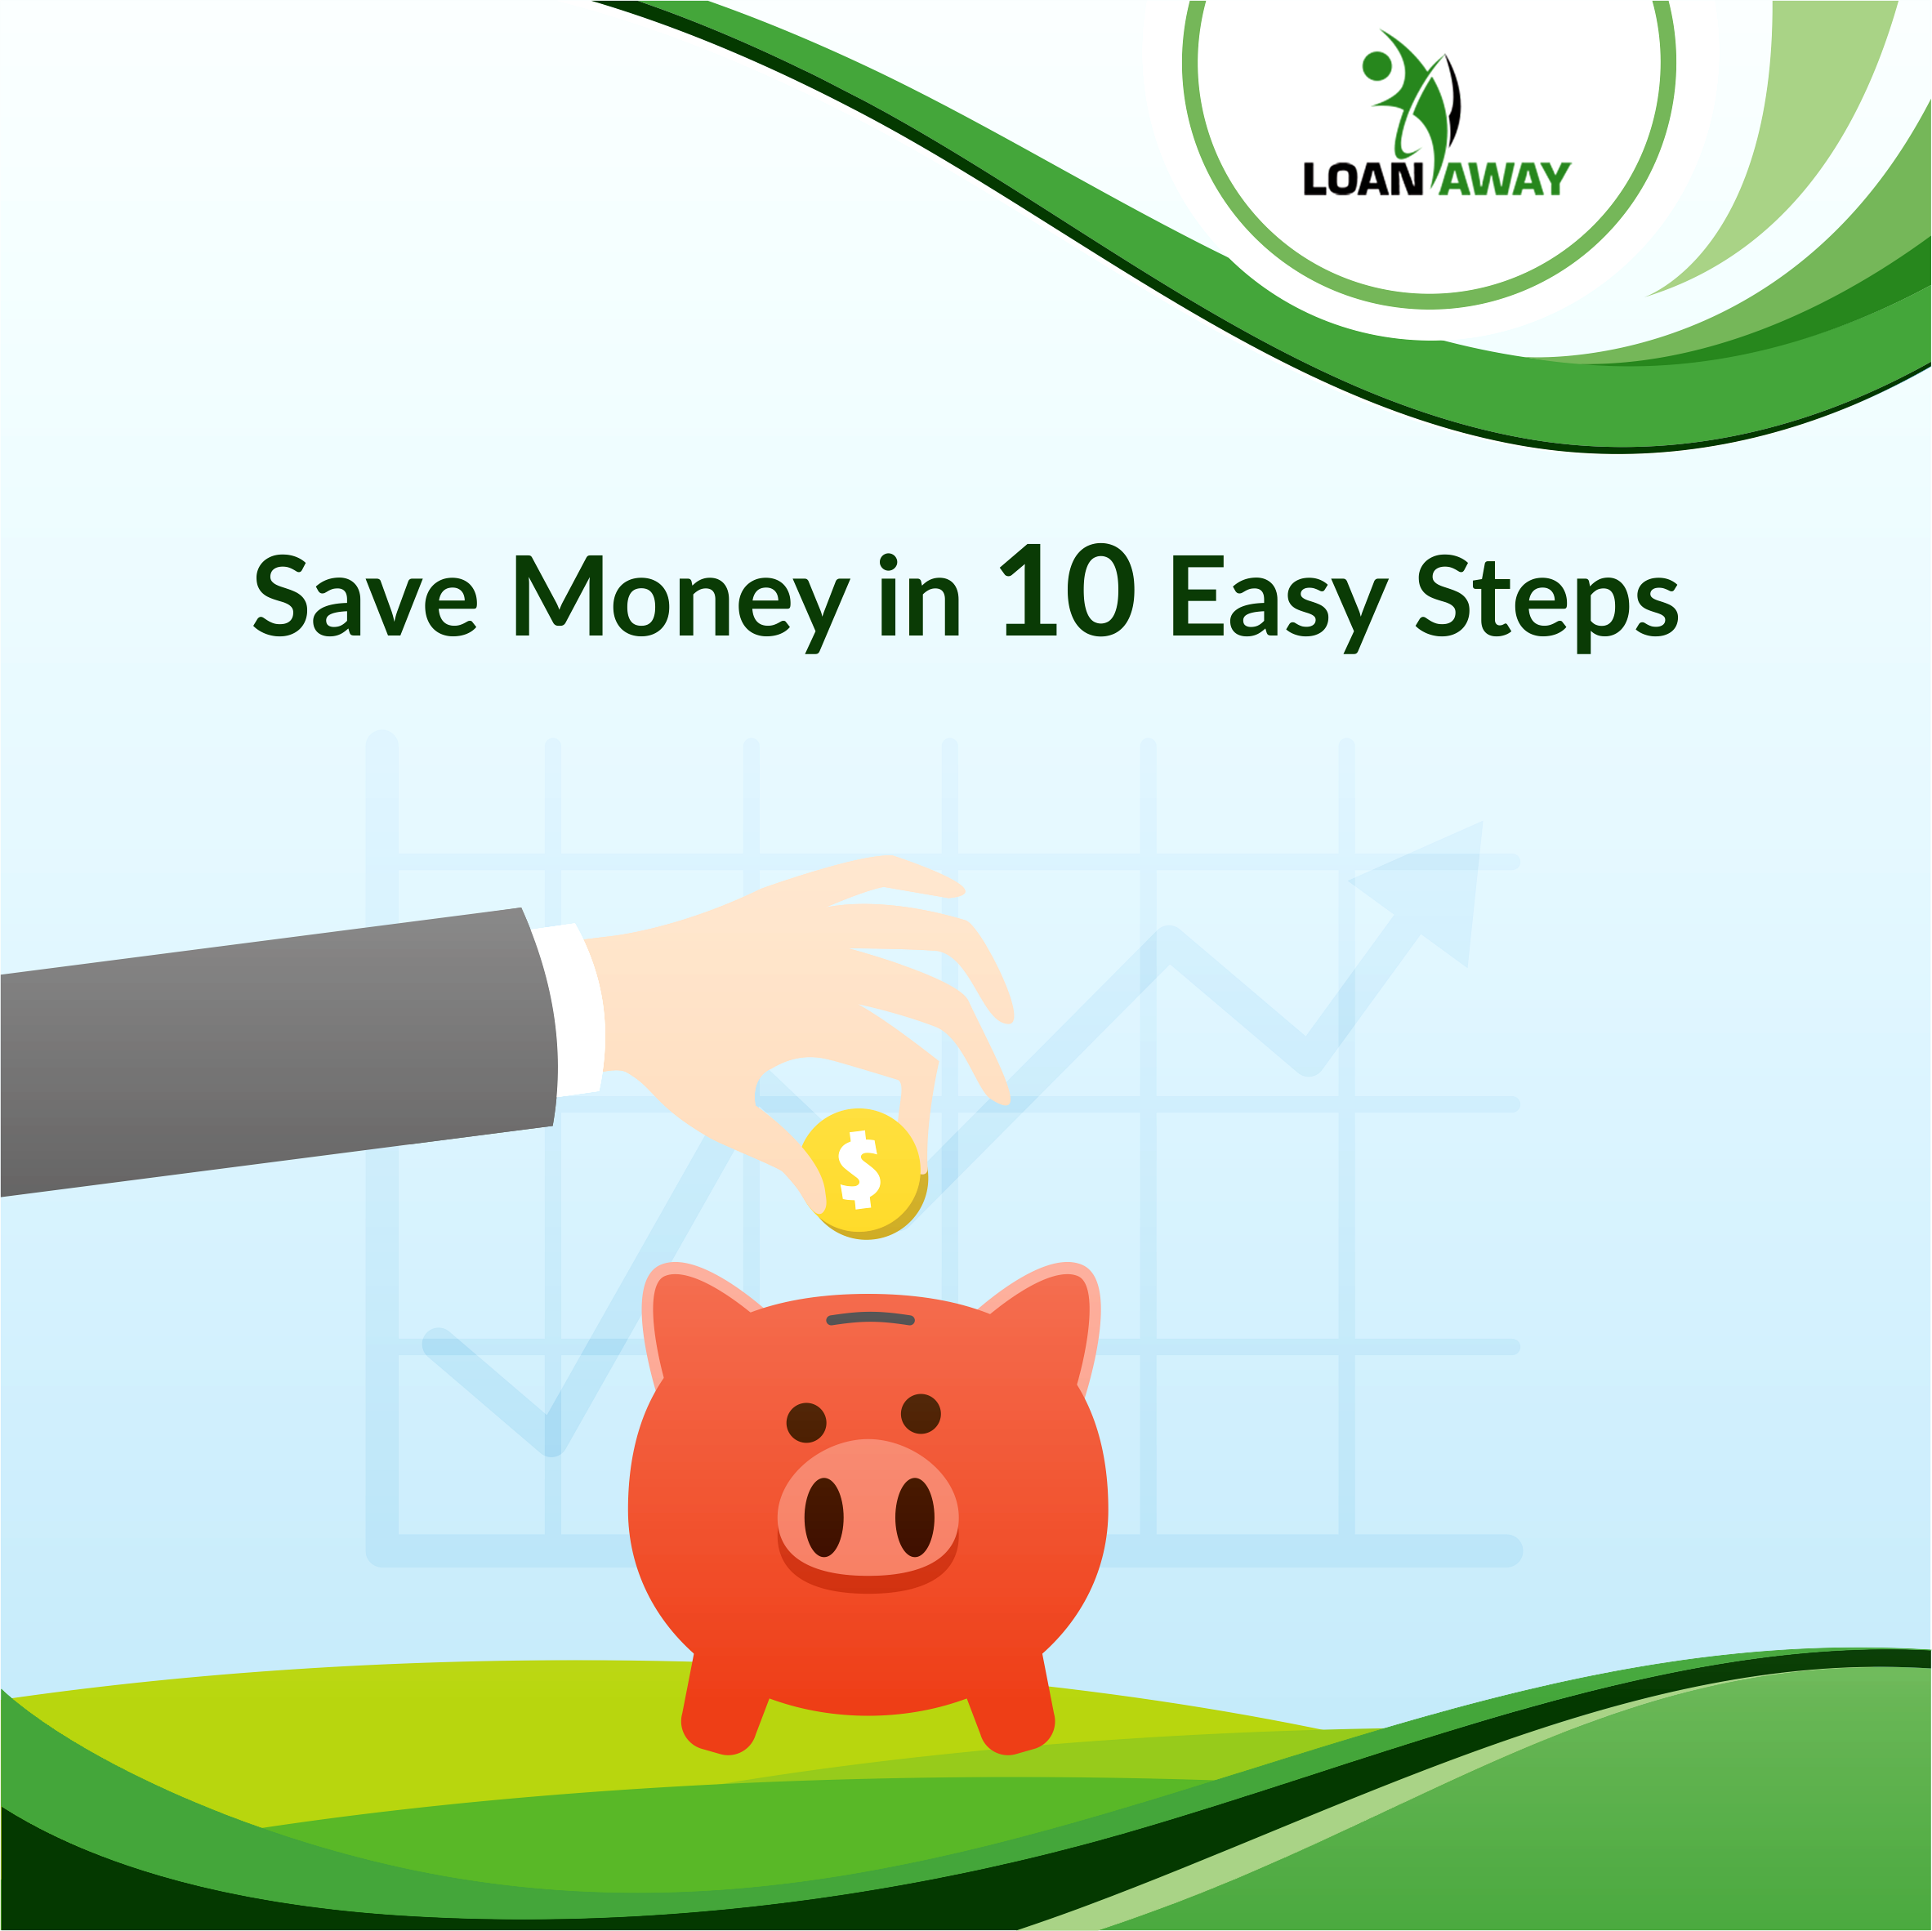 Save Money in 10 Easy Steps